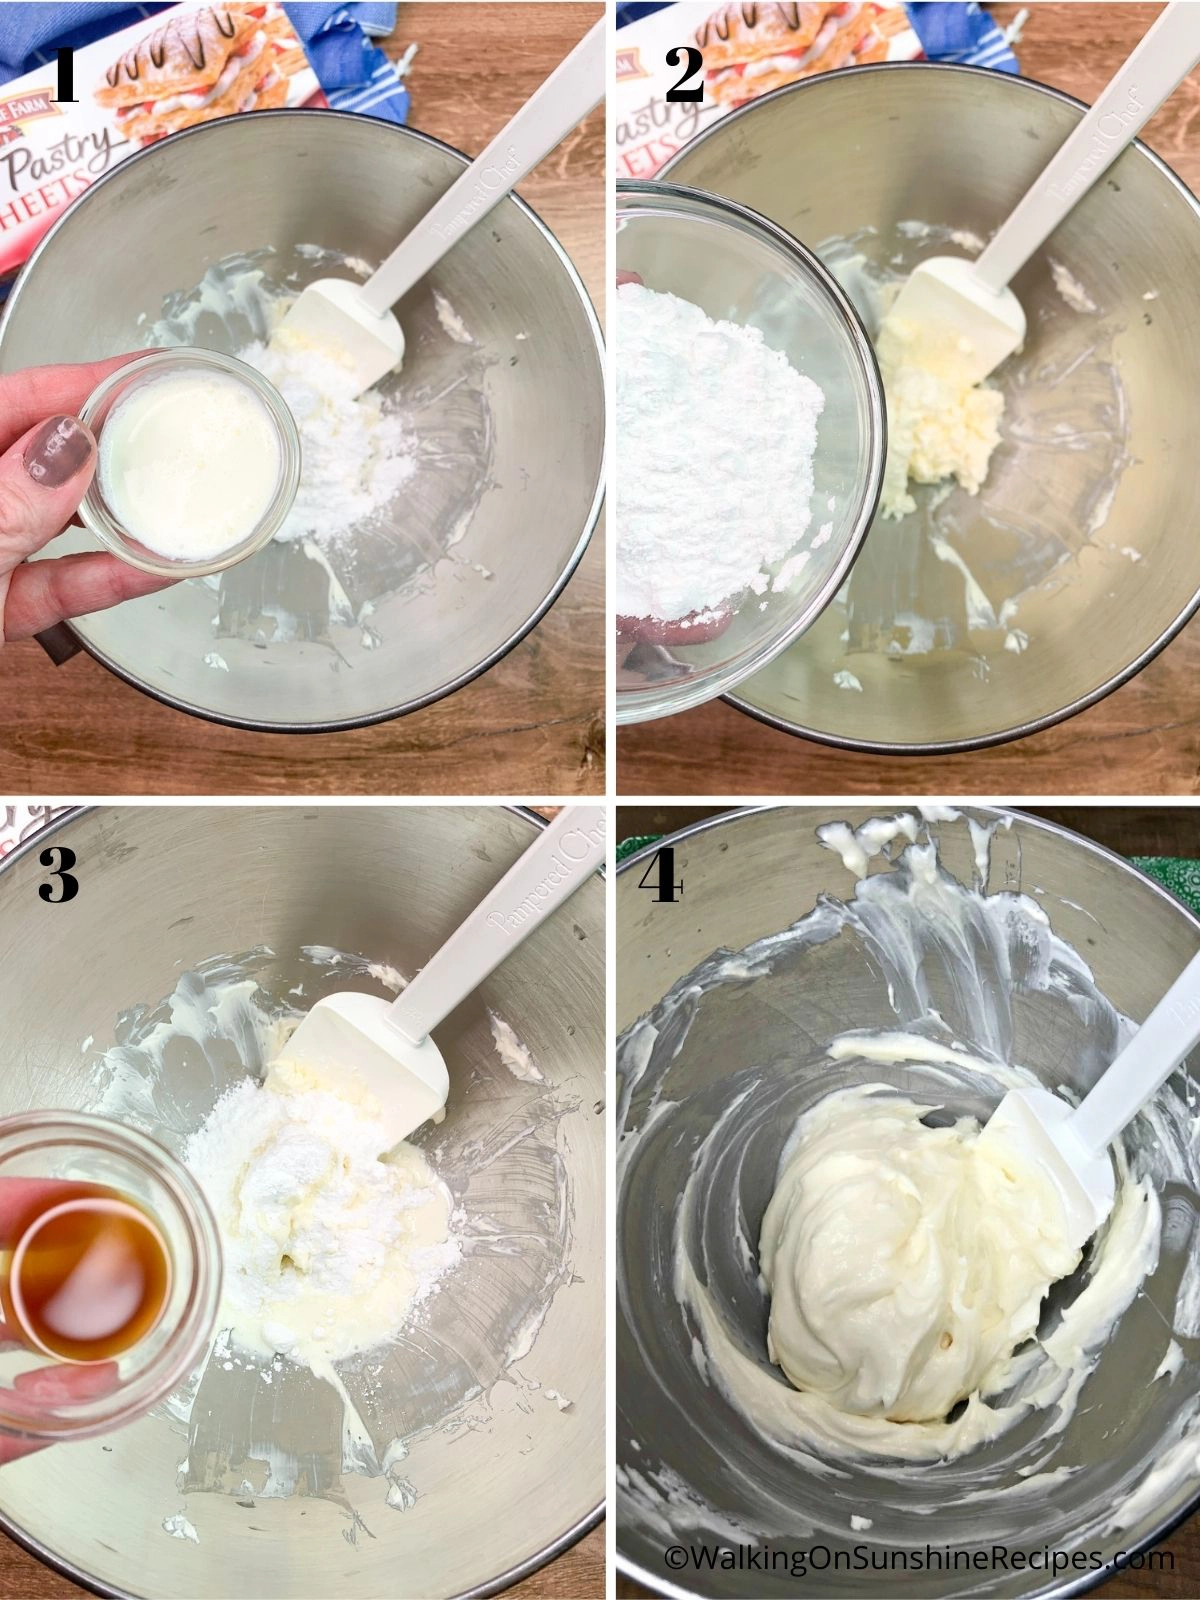 Make Cream Cheese Filling for Puff Pastry Braid with Lemon. 